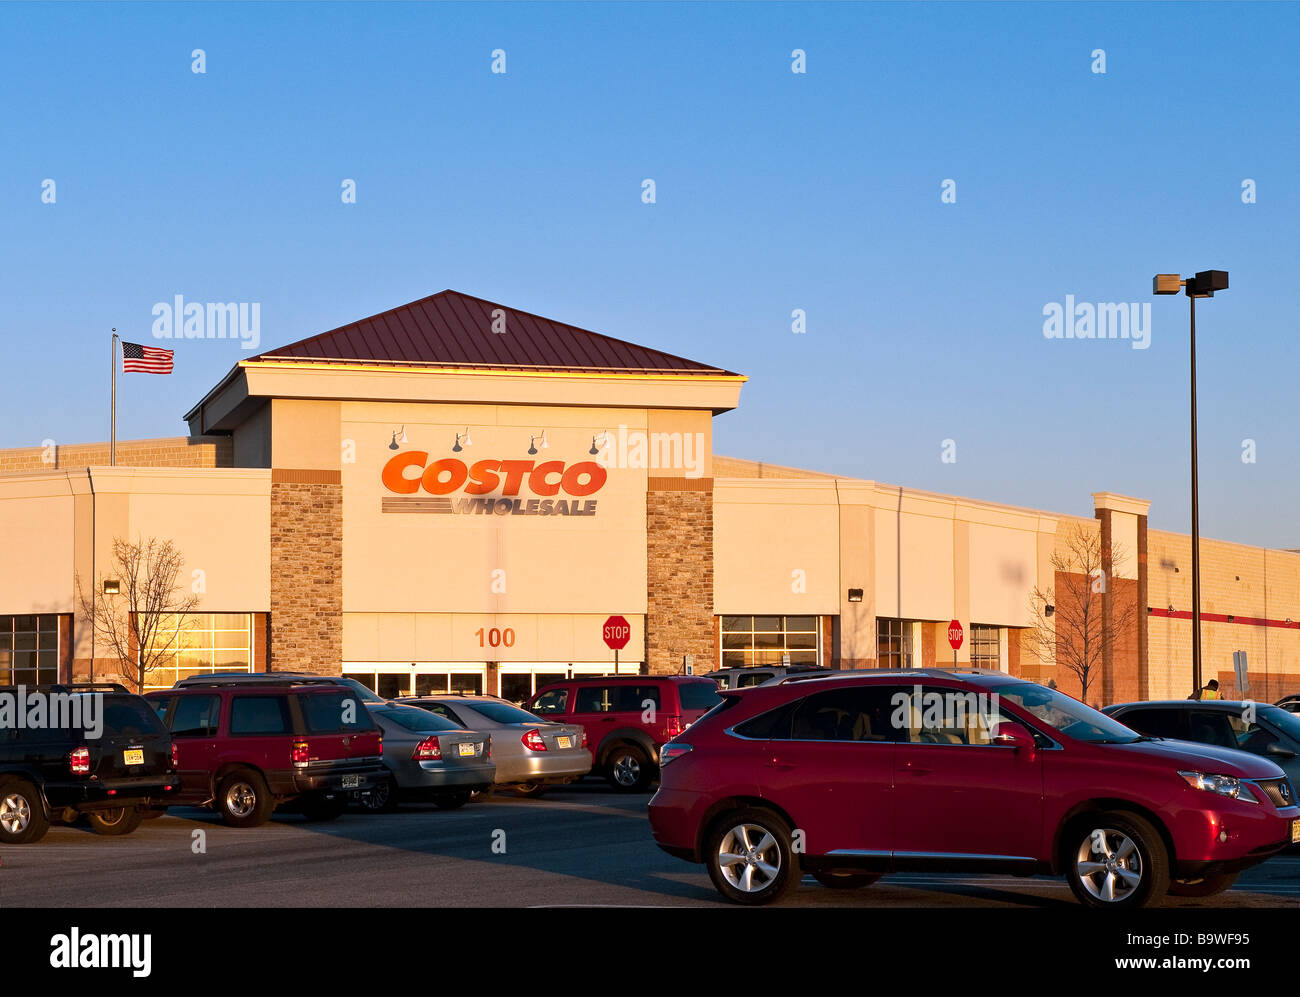 Costco Wholesale Club shopping Banque D'Images